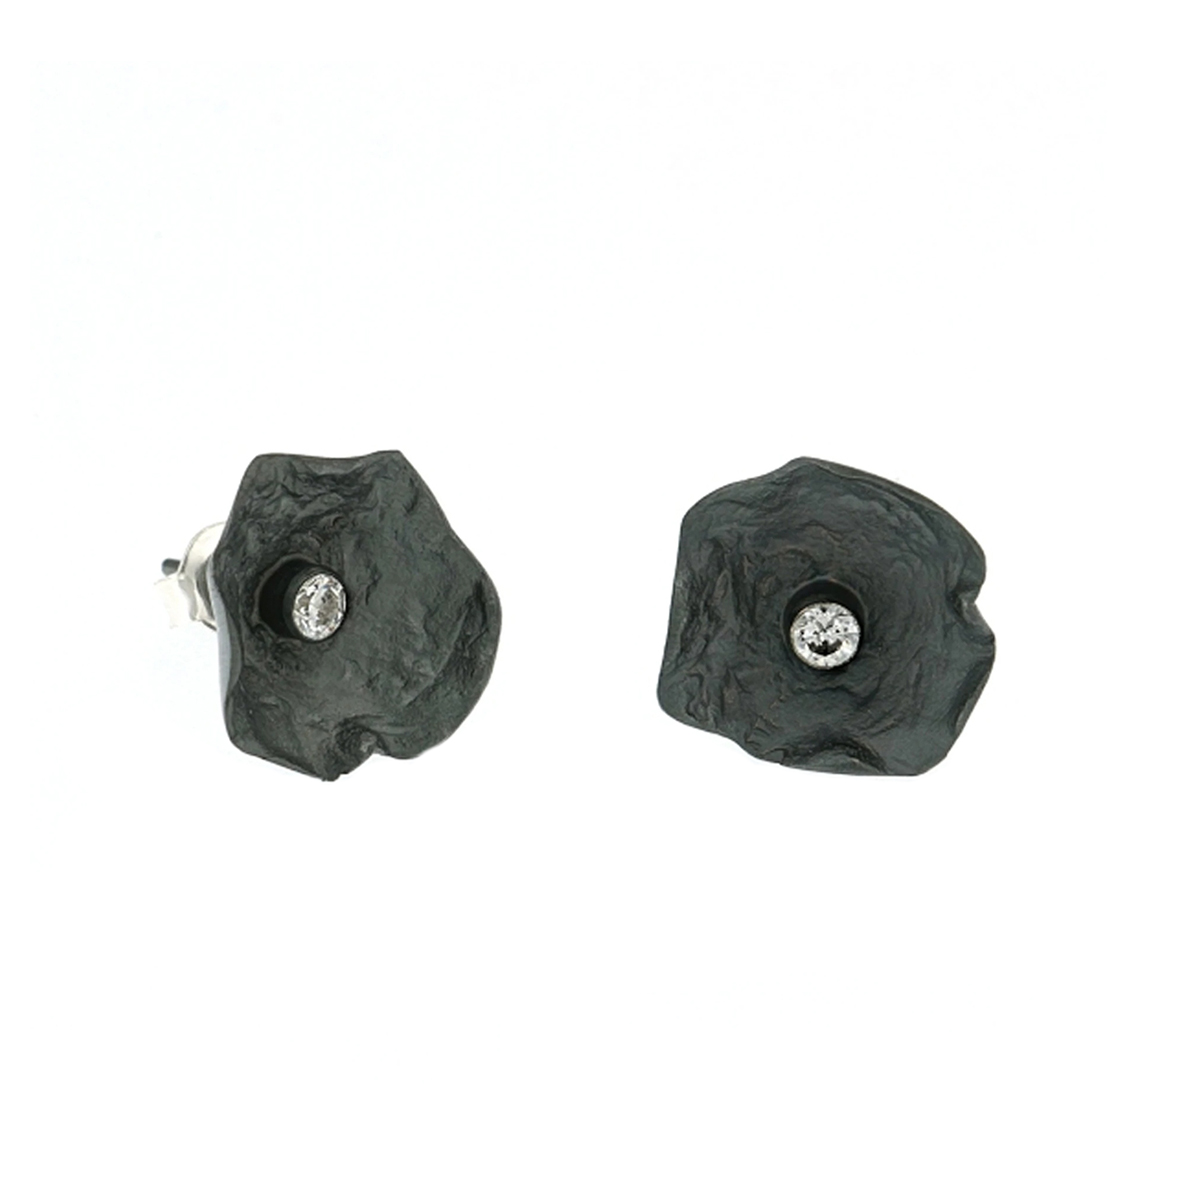 Oxidized Sterling Silver Flower Earrings with Cubic Zirconia